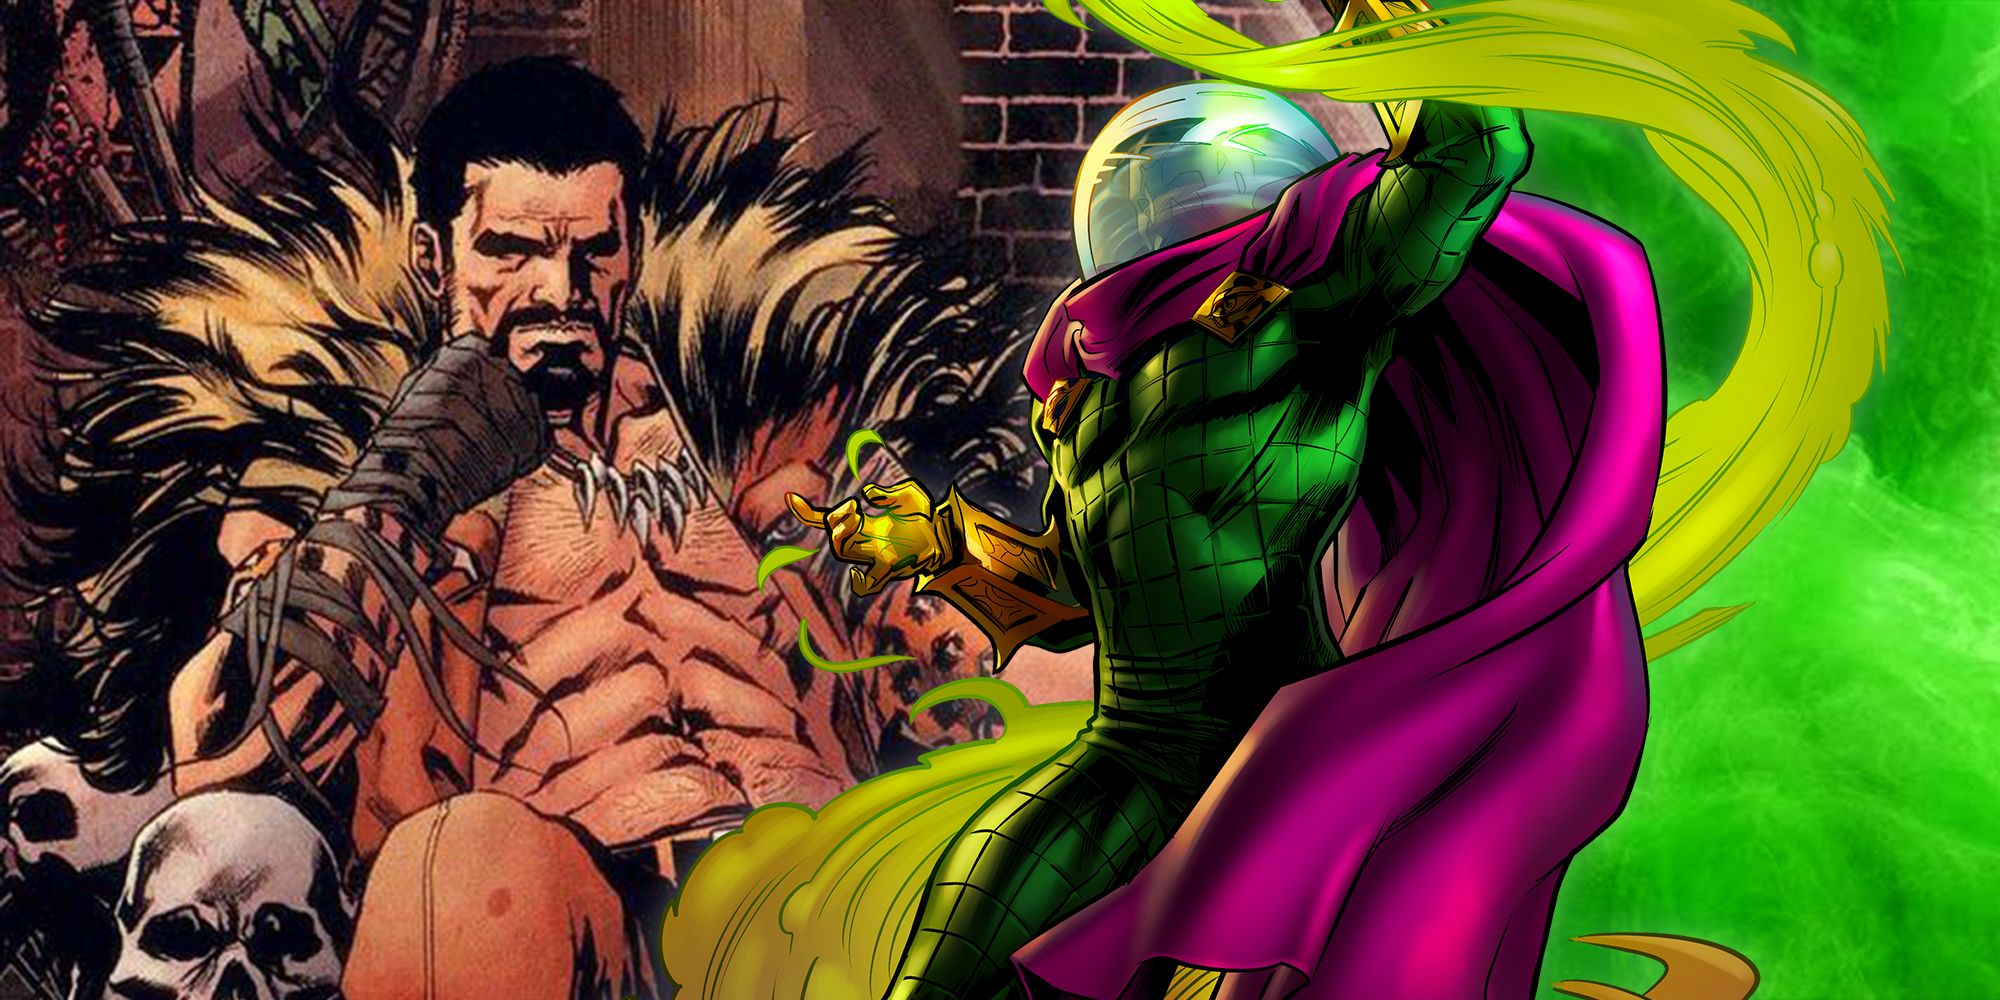 Mysterio and Kraven